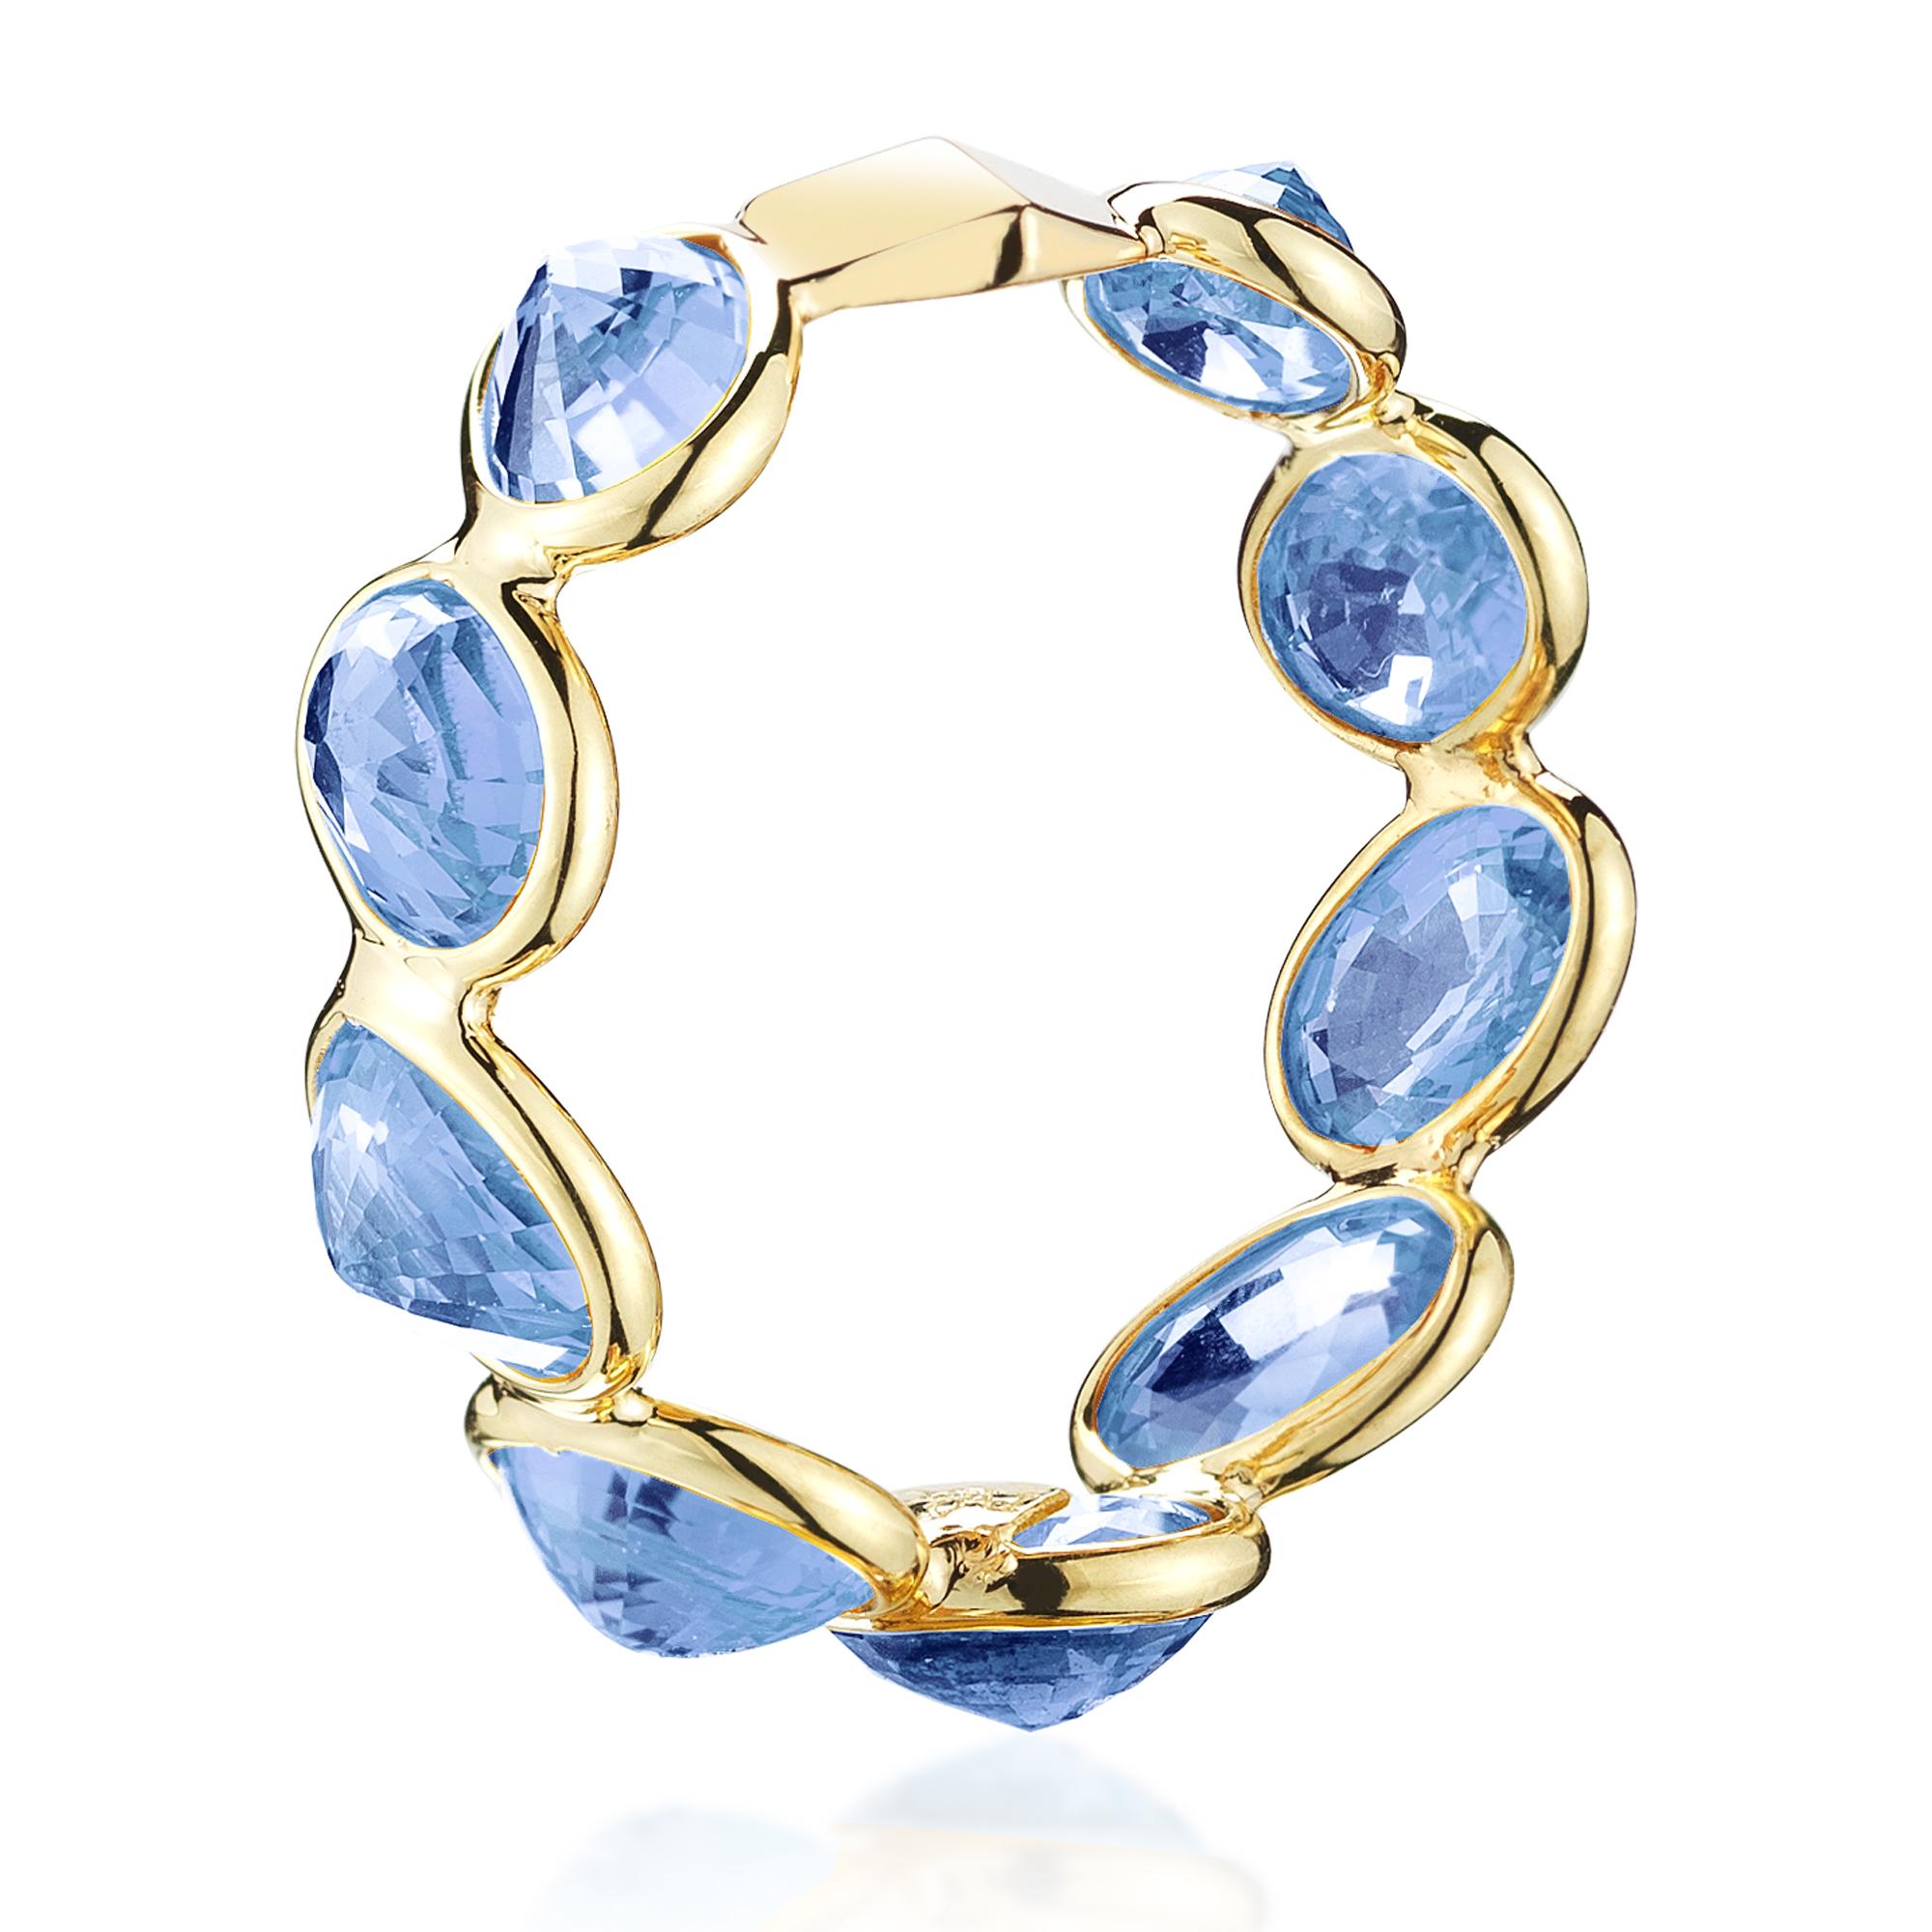 The 18kt yellow gold Ombré band set with multishade oval blue sapphires at 11 o'clock® with signature Brillante® motif.

An ode to the Mediterranean Sea, Paolo Costagli crafts sparkling blue sapphires into a ring made in 18kt yellow gold. The ring